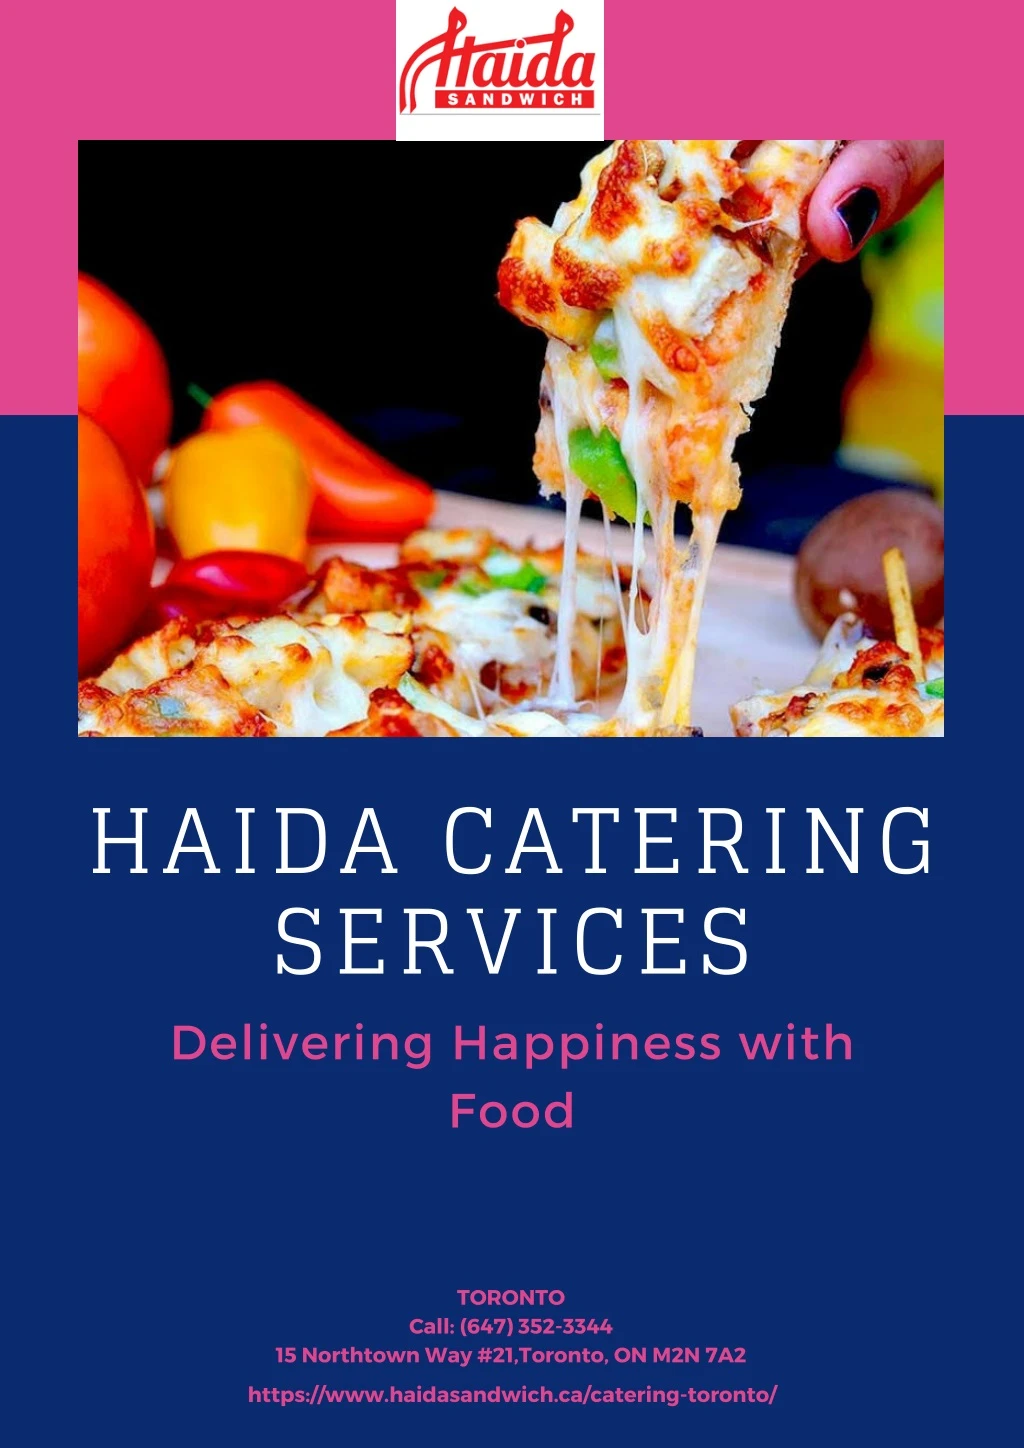 haida catering services delivering happiness with